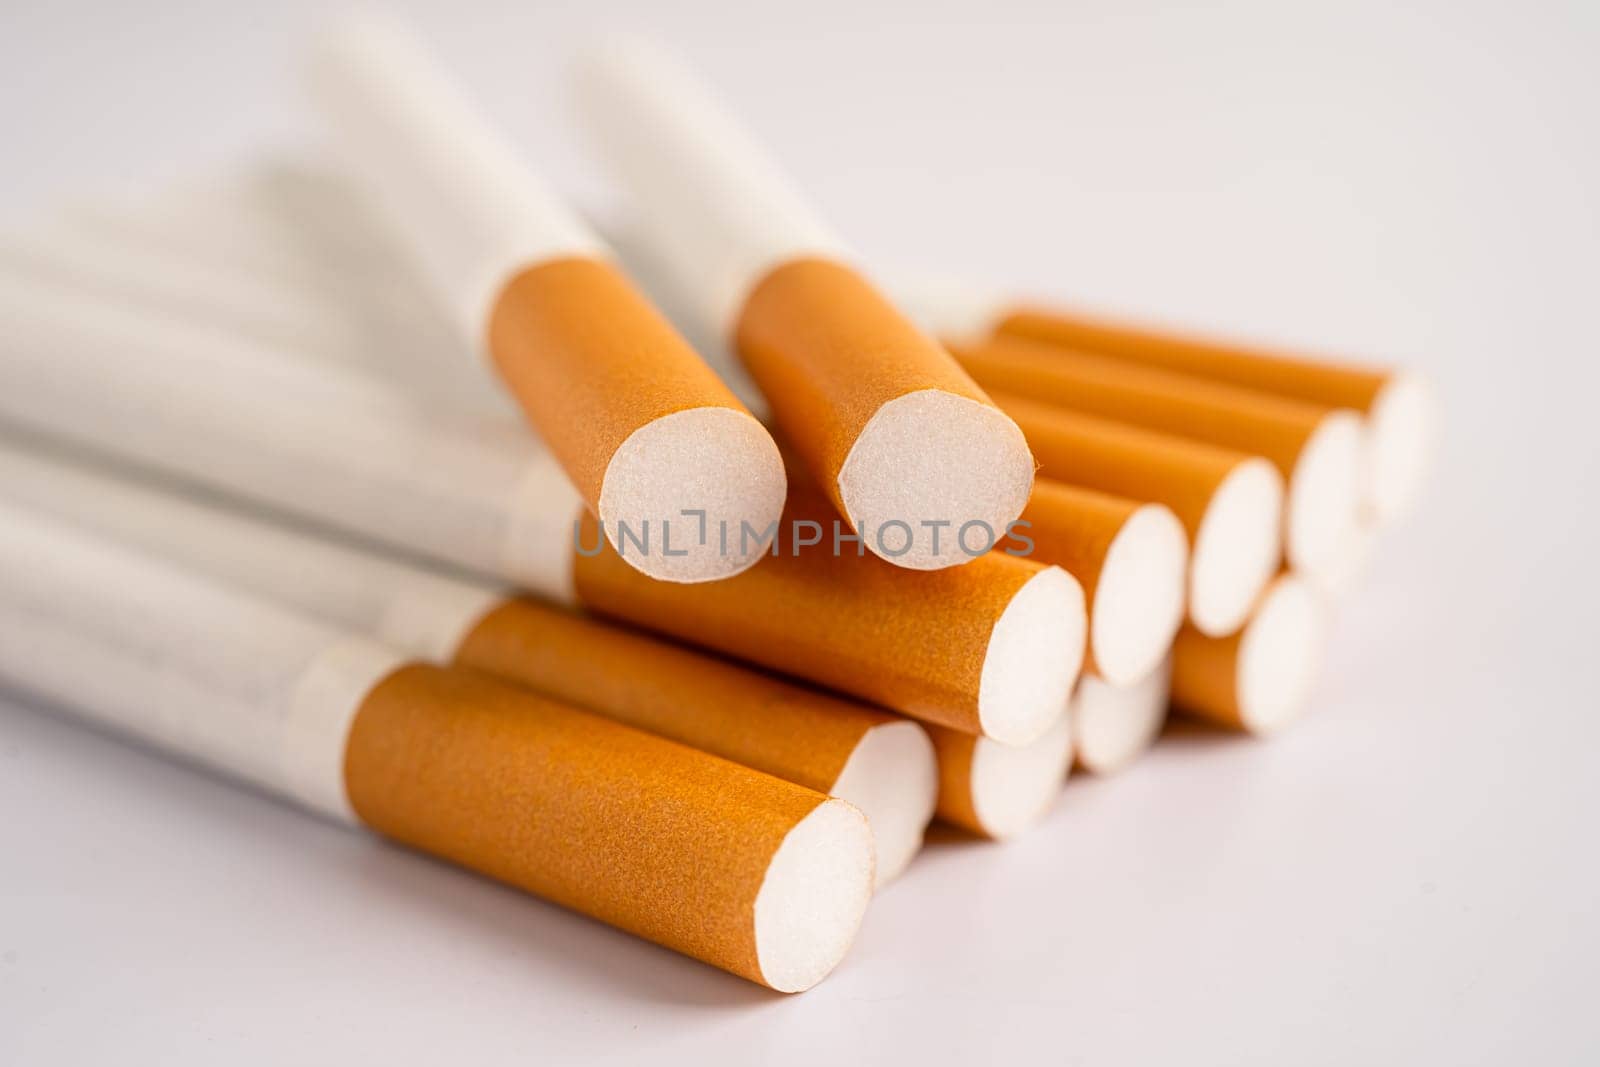 Cigarette, tobacco in roll paper with filter tube, No smoking concept.